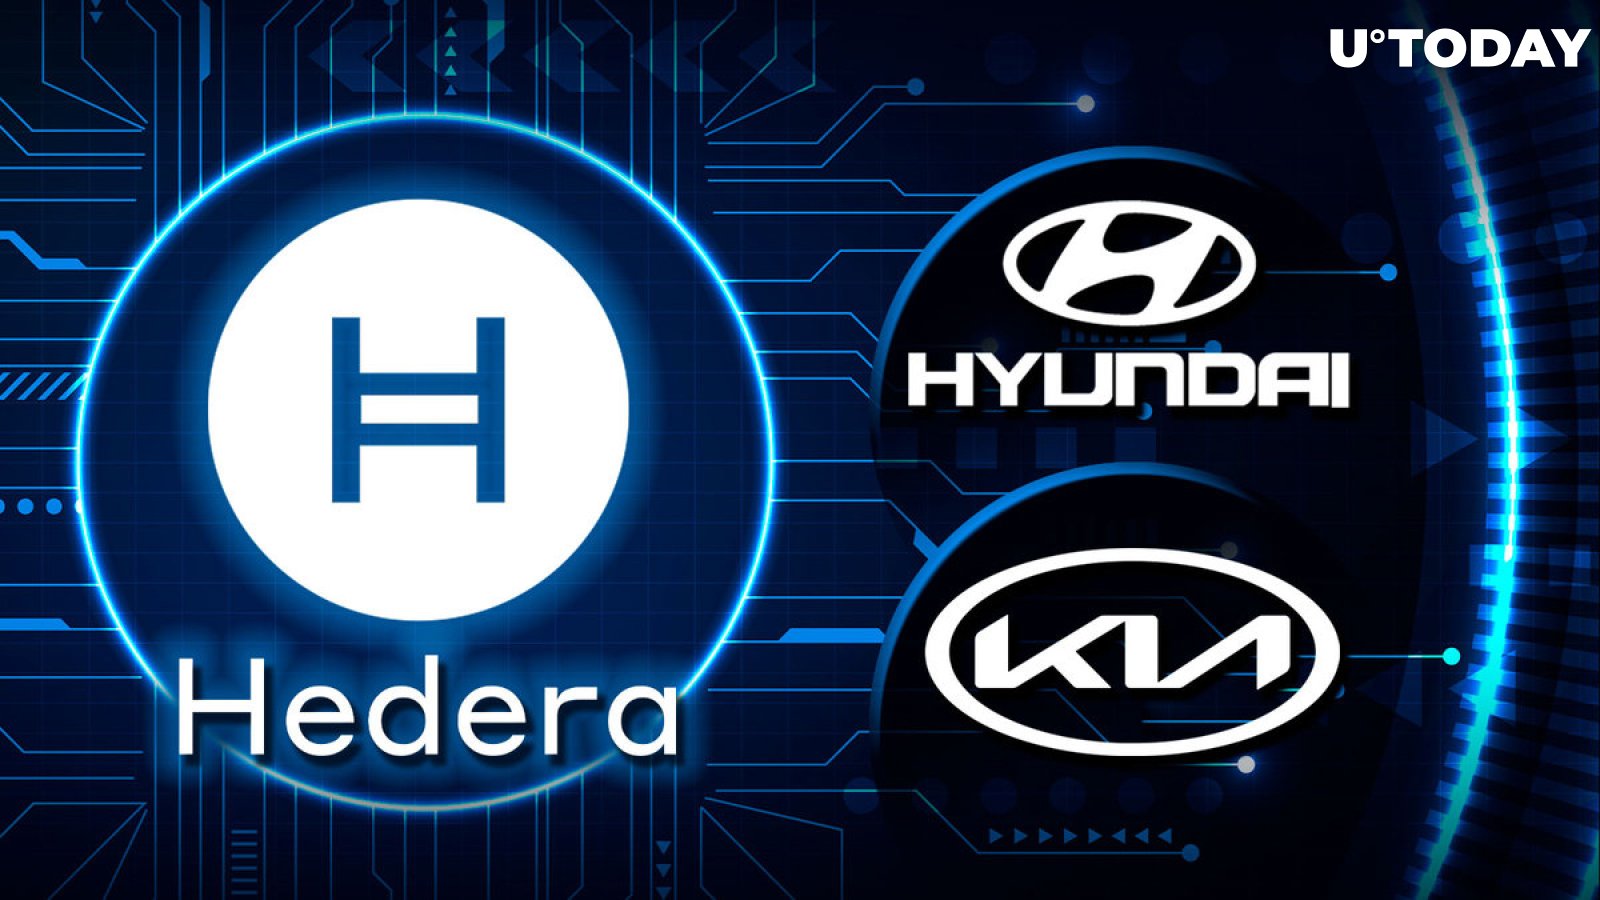 Hedera Network Embraced by Hyundai and Kia for Innovation